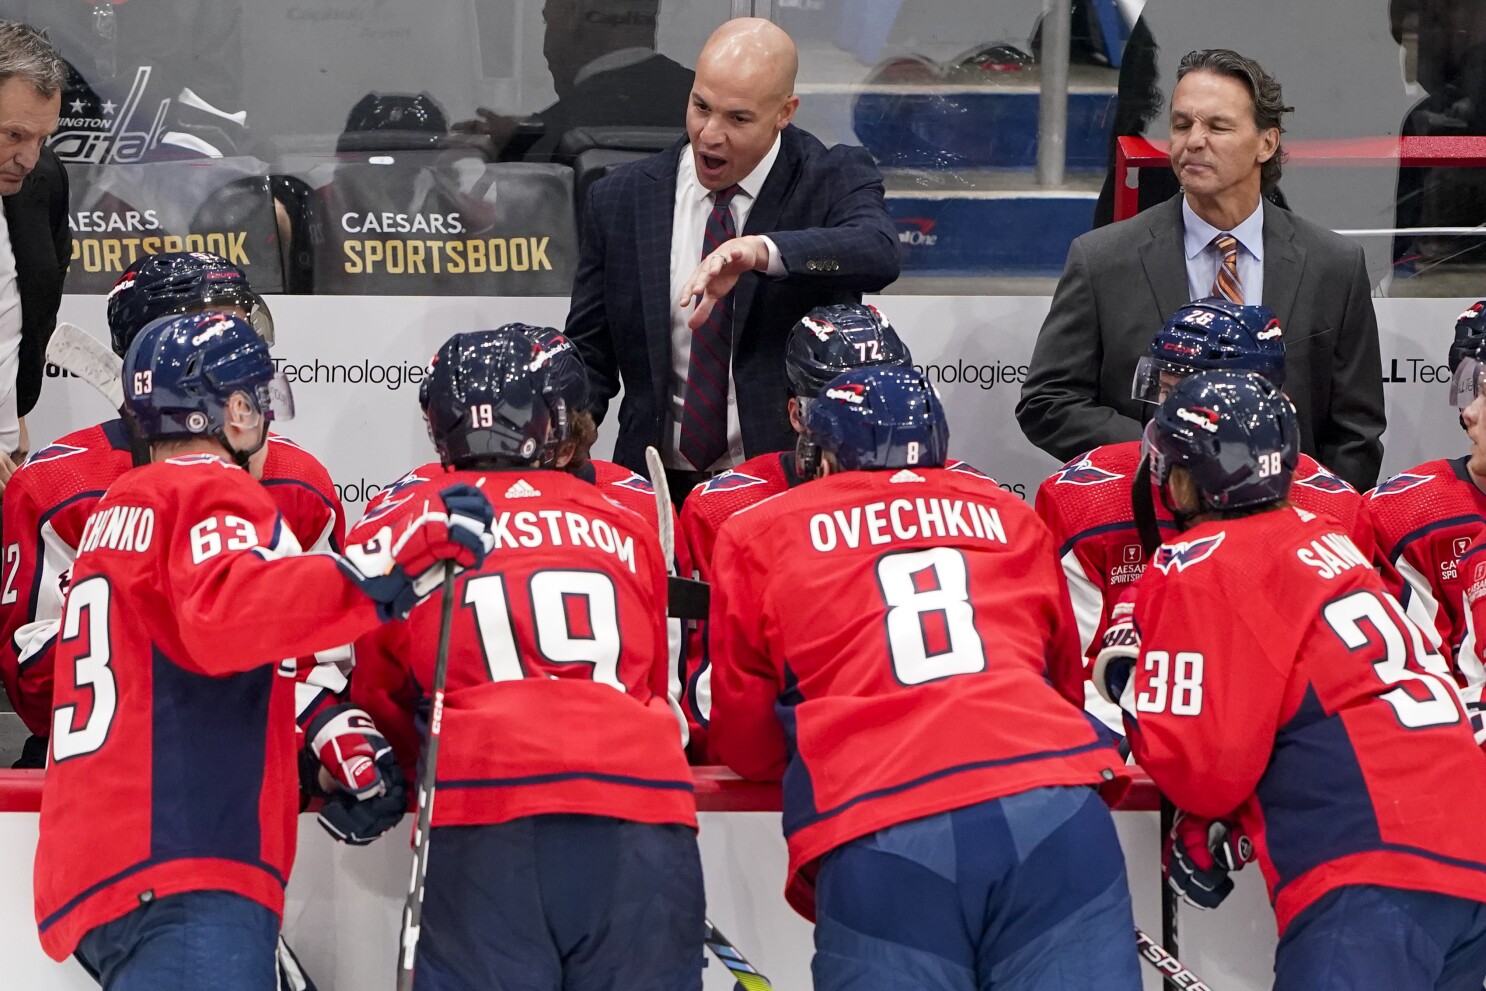 The Capitals broke in some of their Stadium Series gear at practice